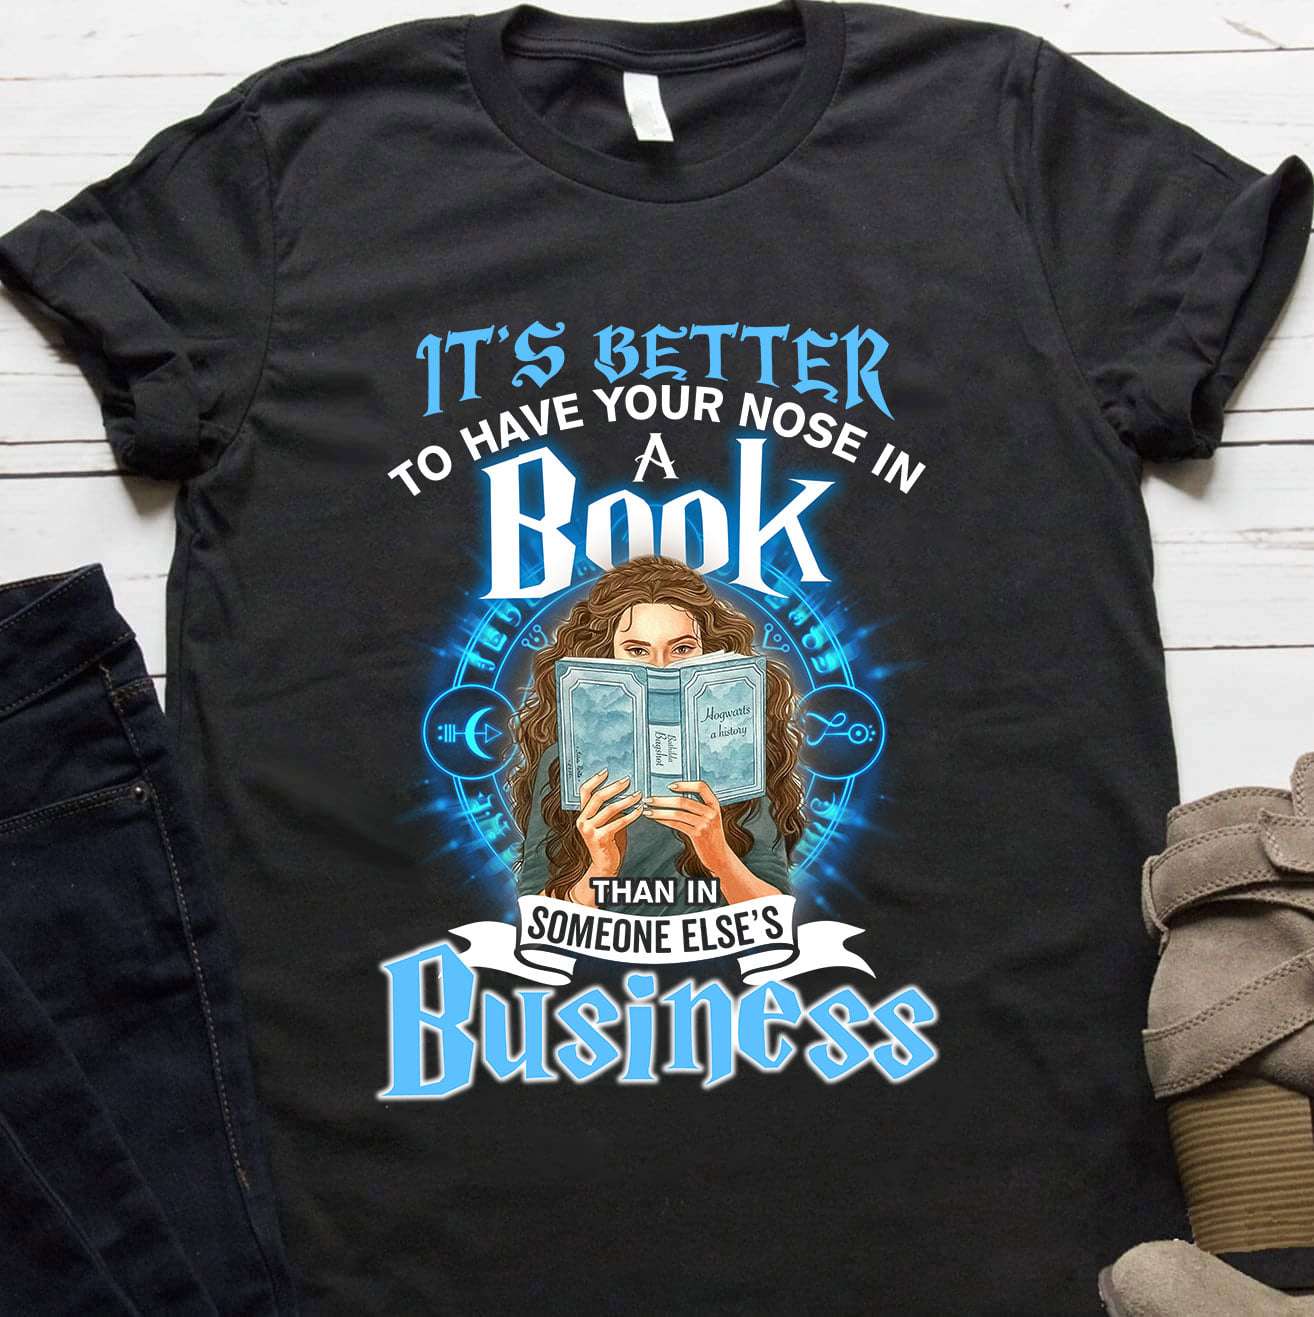 Girl Read Book, Bookaholic Gift - It's better to have your nose in a book than in someone else's business